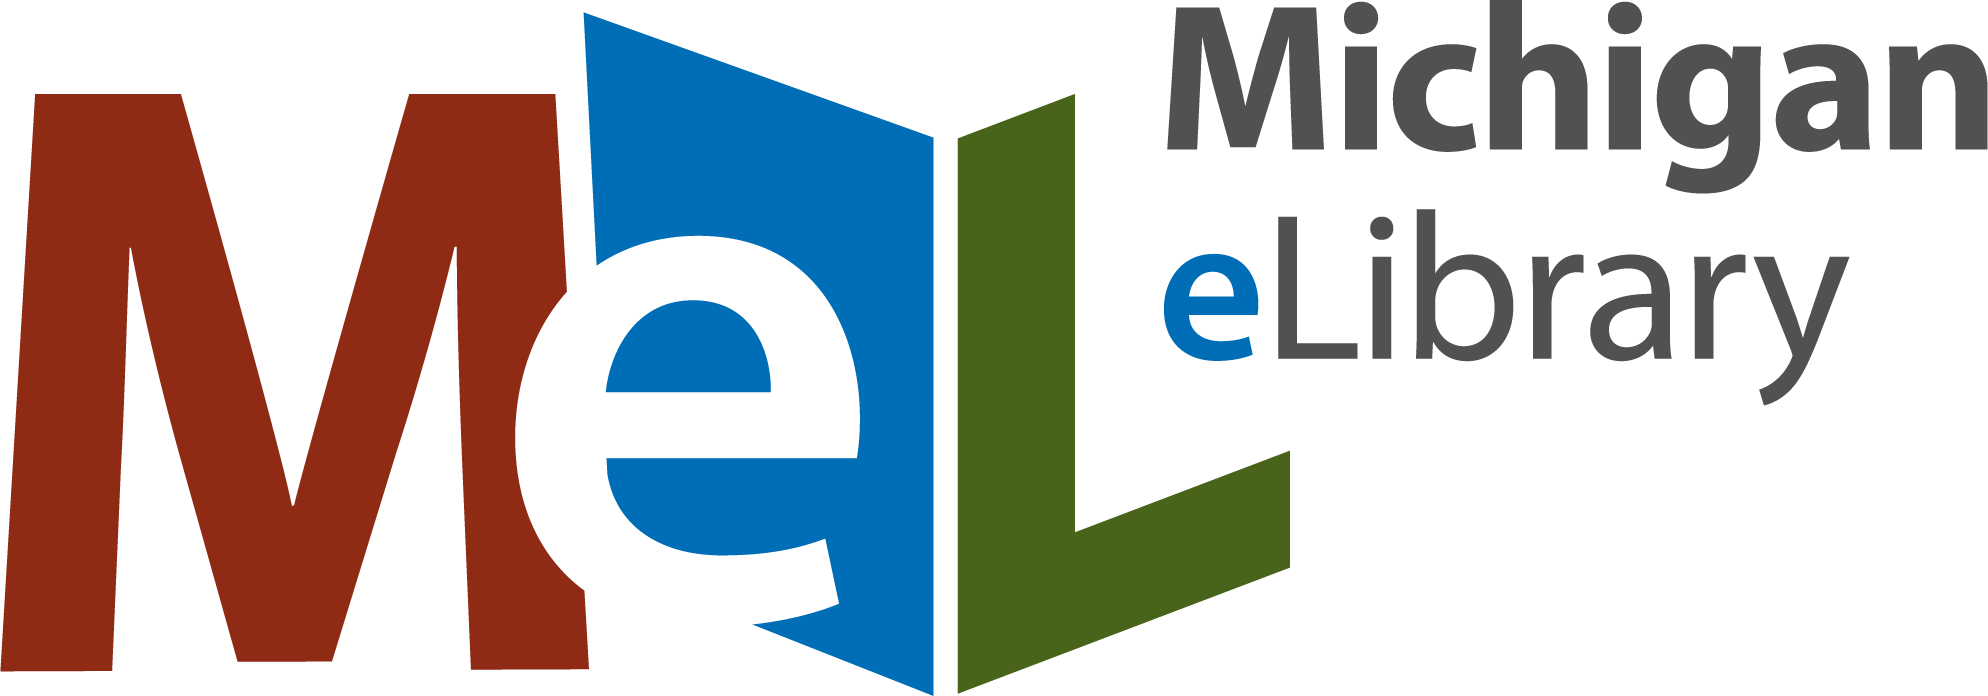 Michigan eLibrary - Access online databases and resources